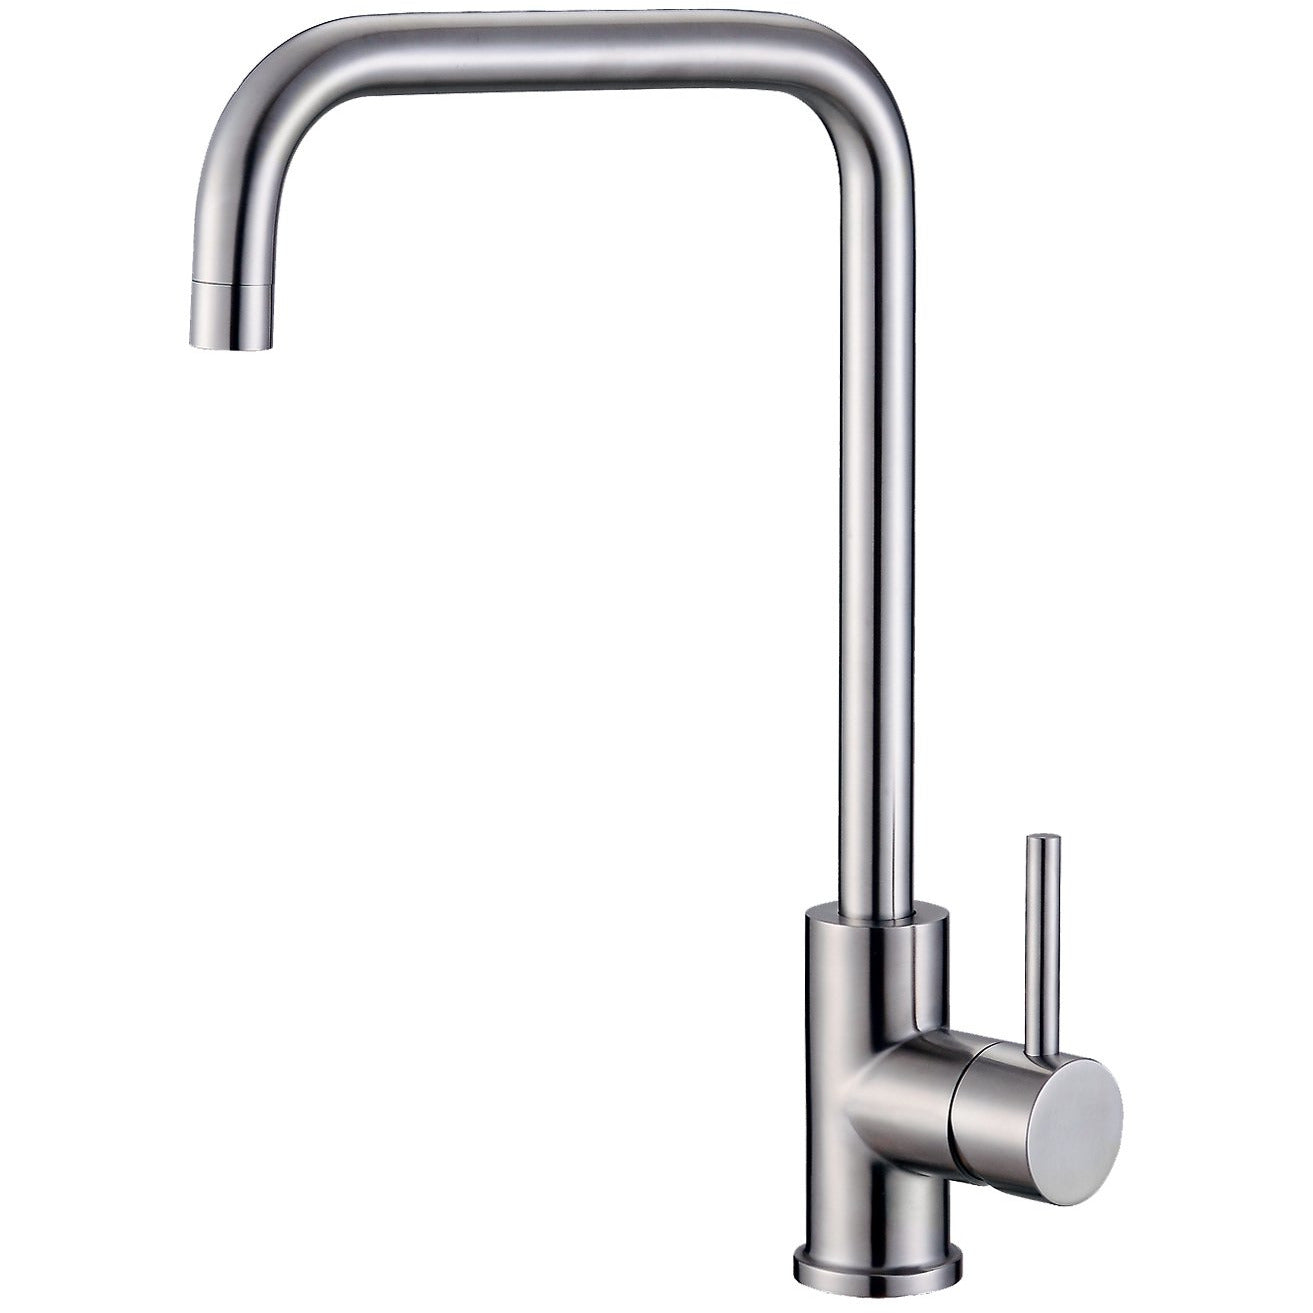 Cosmos Square Single Hole Bar, Kitchen or Bathroom Vessel Sink Faucet